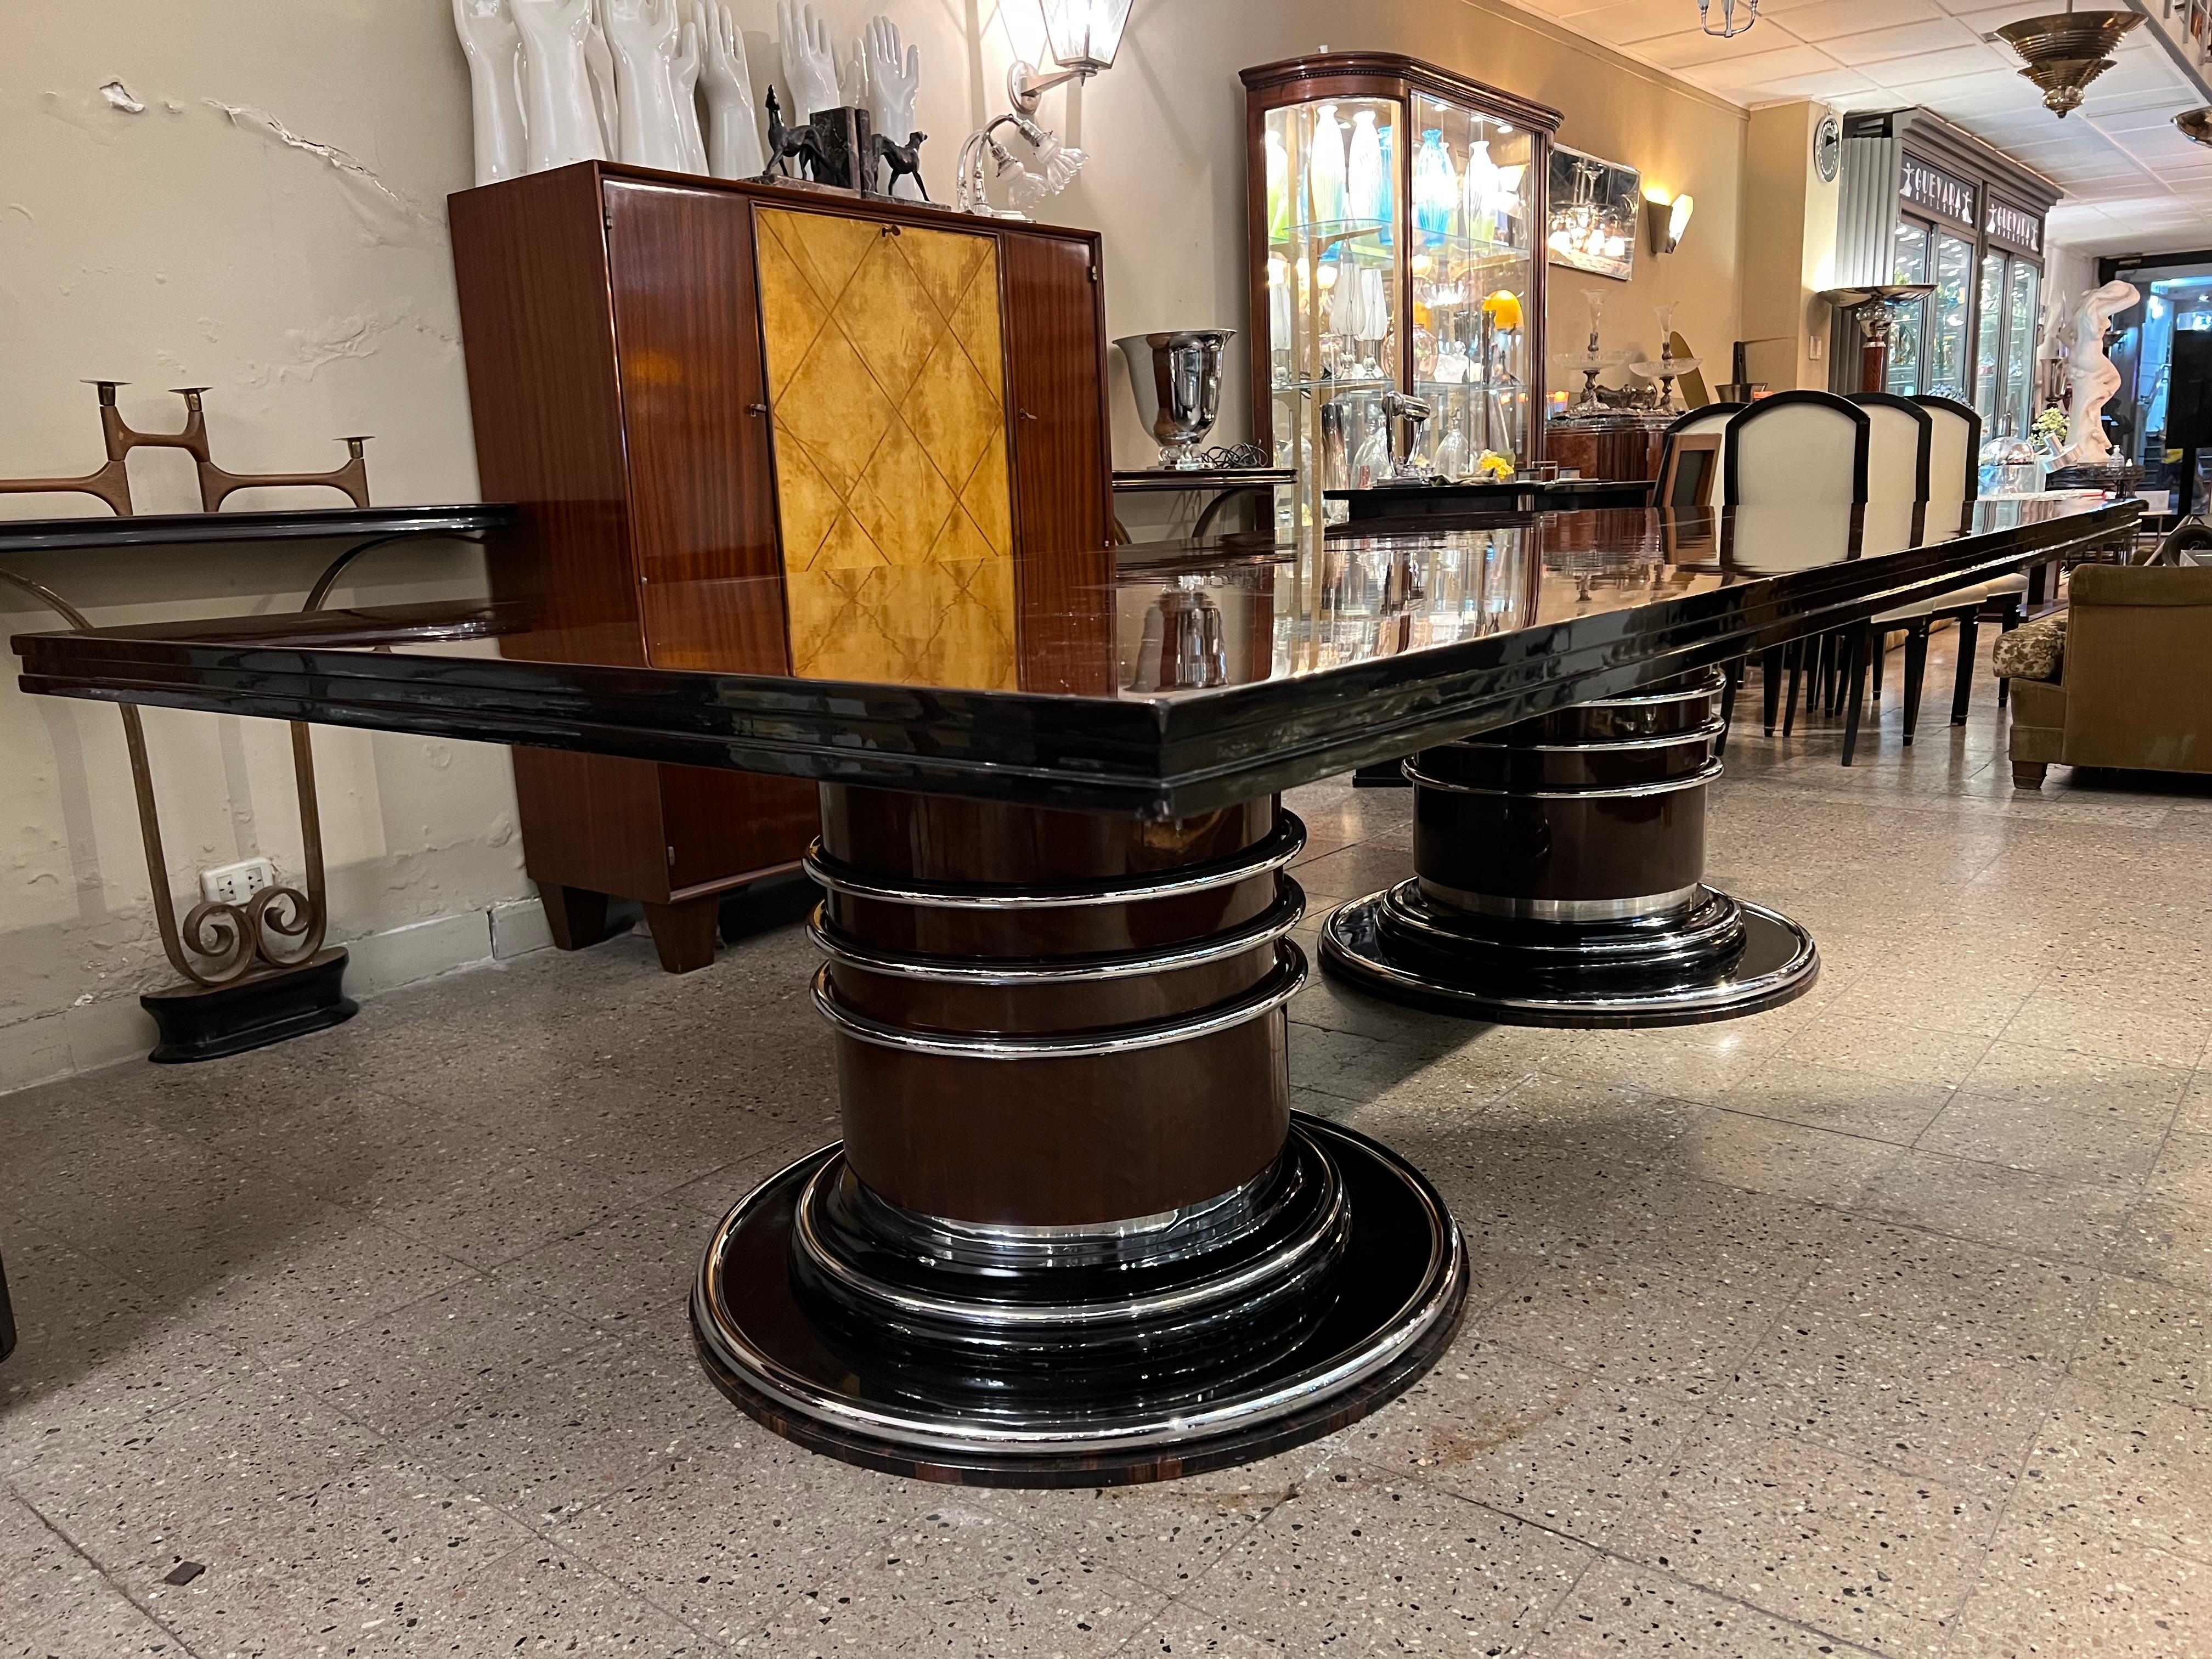 Amaizing Art Deco Table, '12 Persons', 1920, France in Chrome Steel and Wood For Sale 1